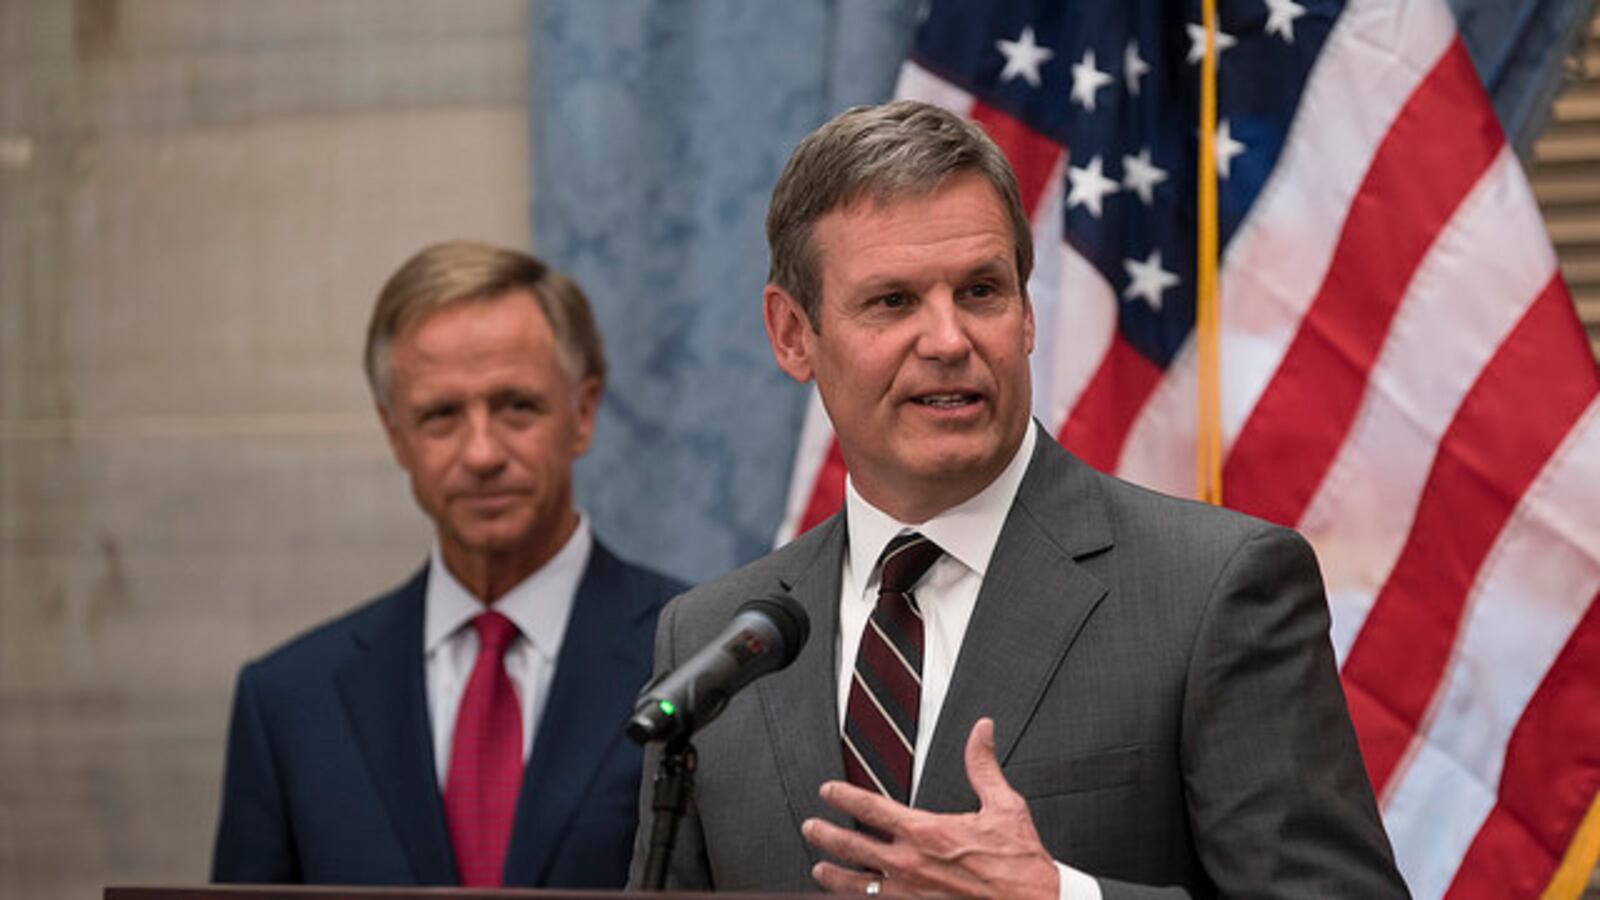 Bill Lee speaks with reporters in November 2018 after his election as Tennessee's 50th governor, as outgoing Gov. Bill Haslam looks on.